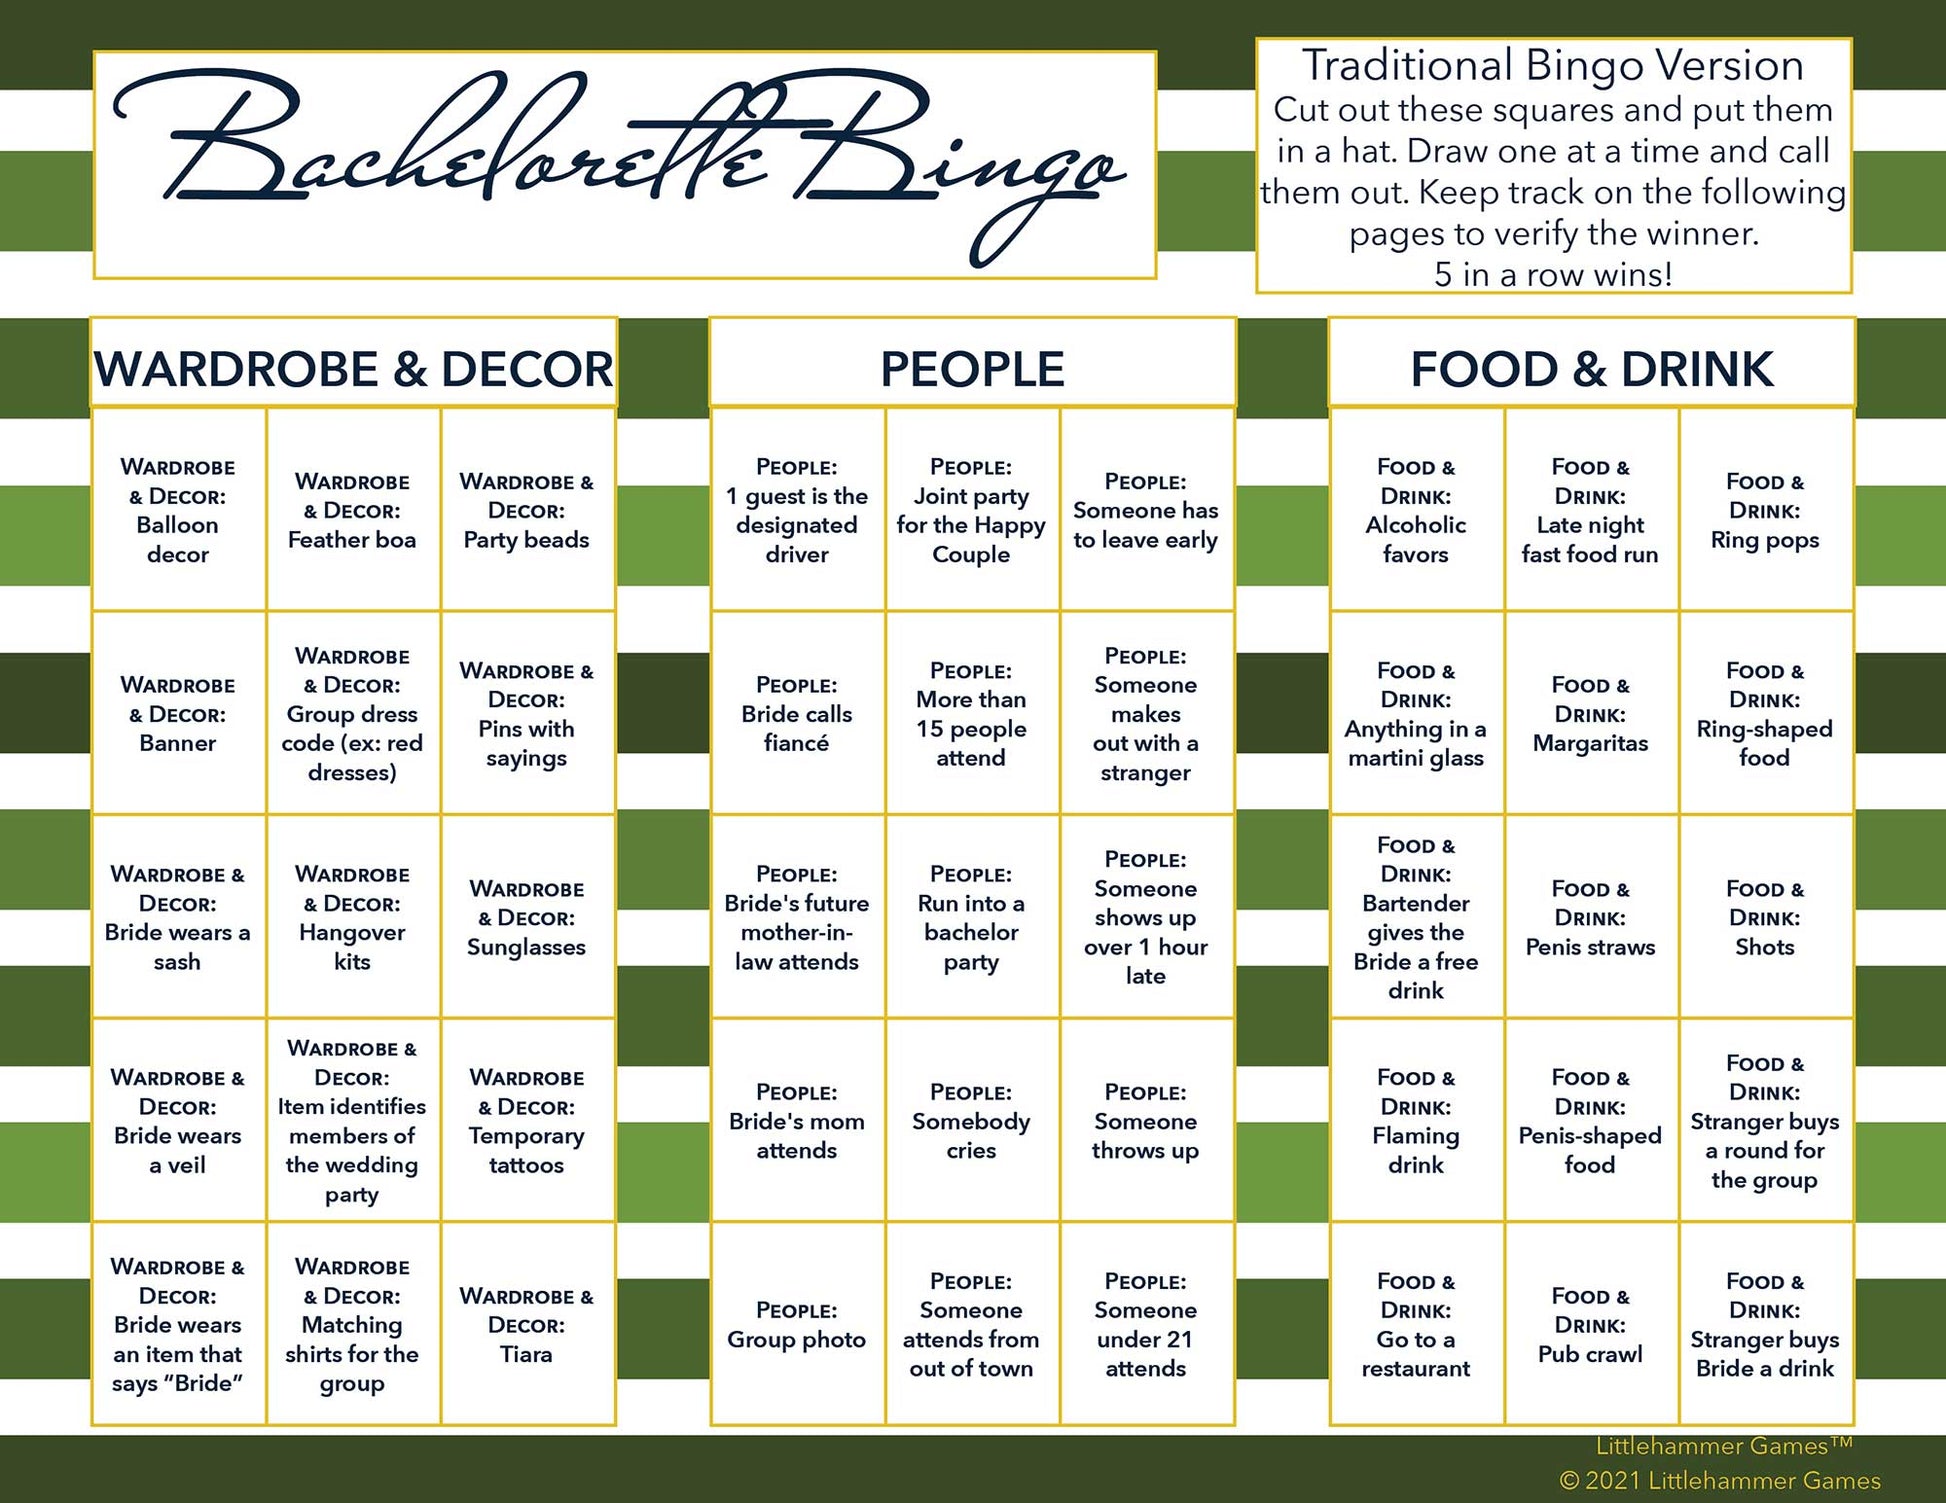 Bachelorette Bingo calling card with a green-striped background